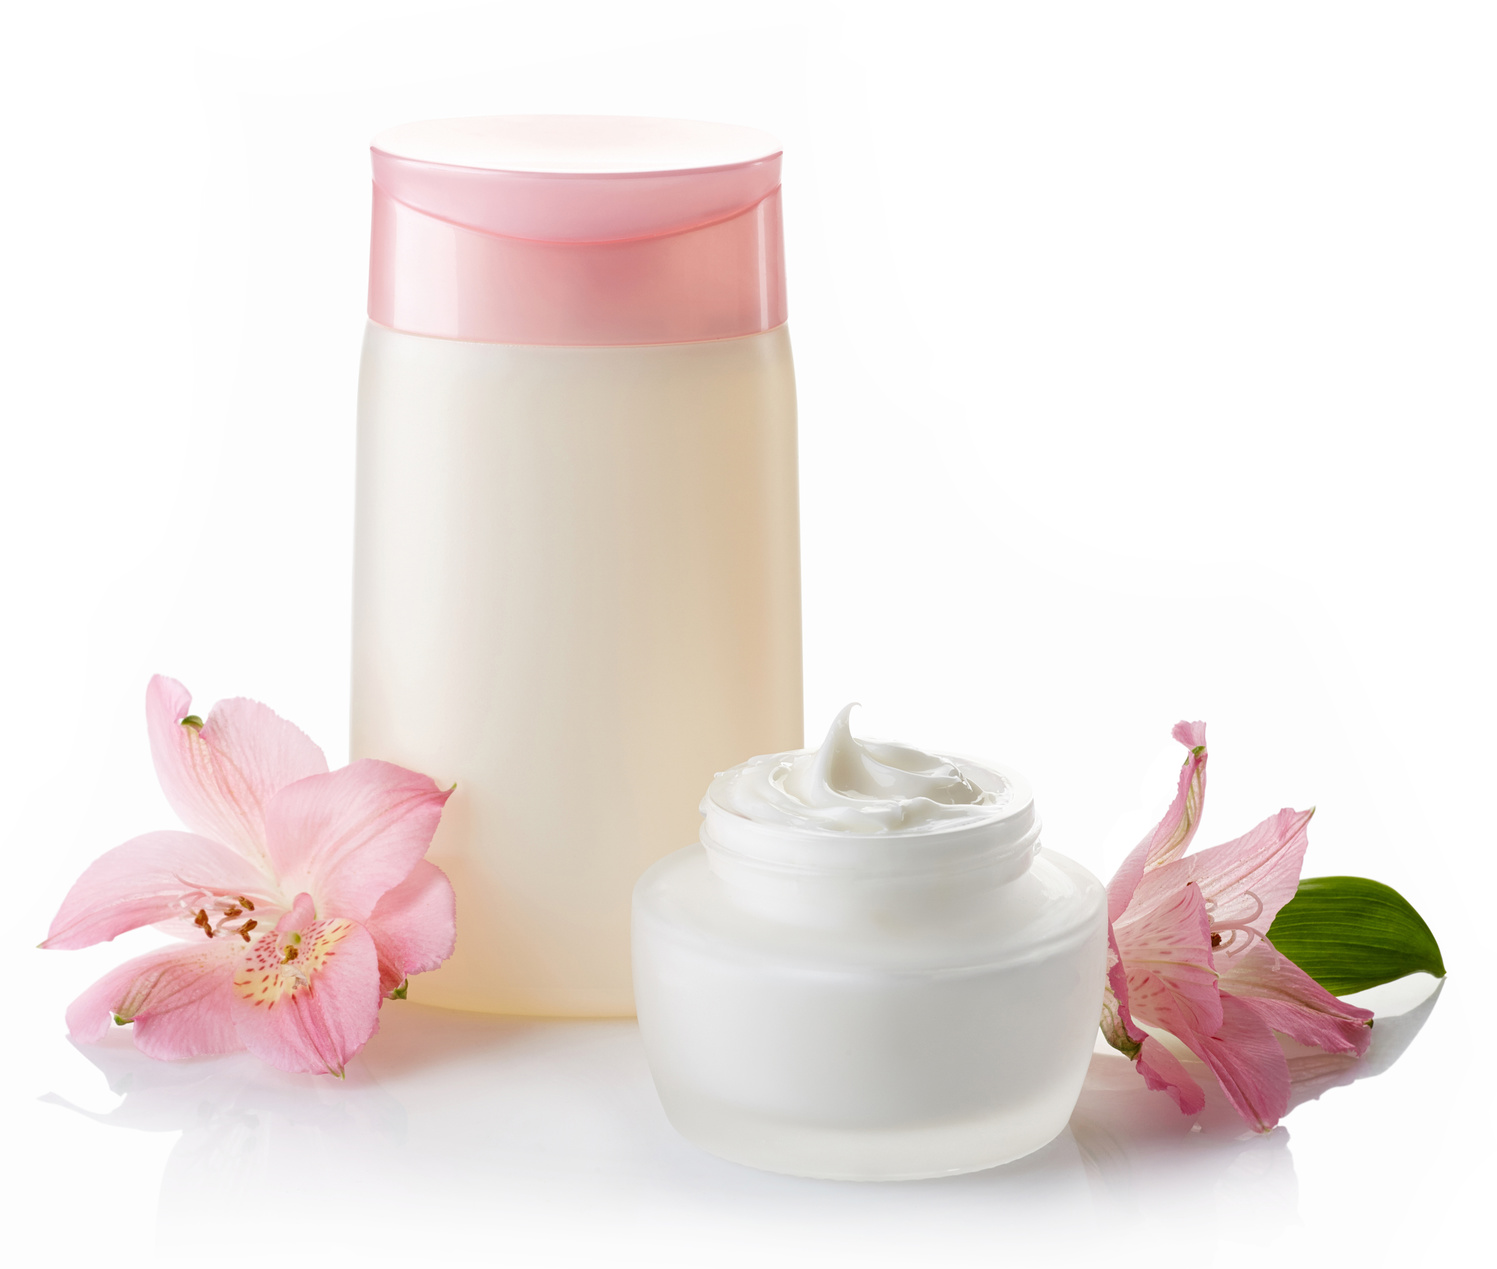 Bottle of cosmetic lotion and jar of cream isolated on white background